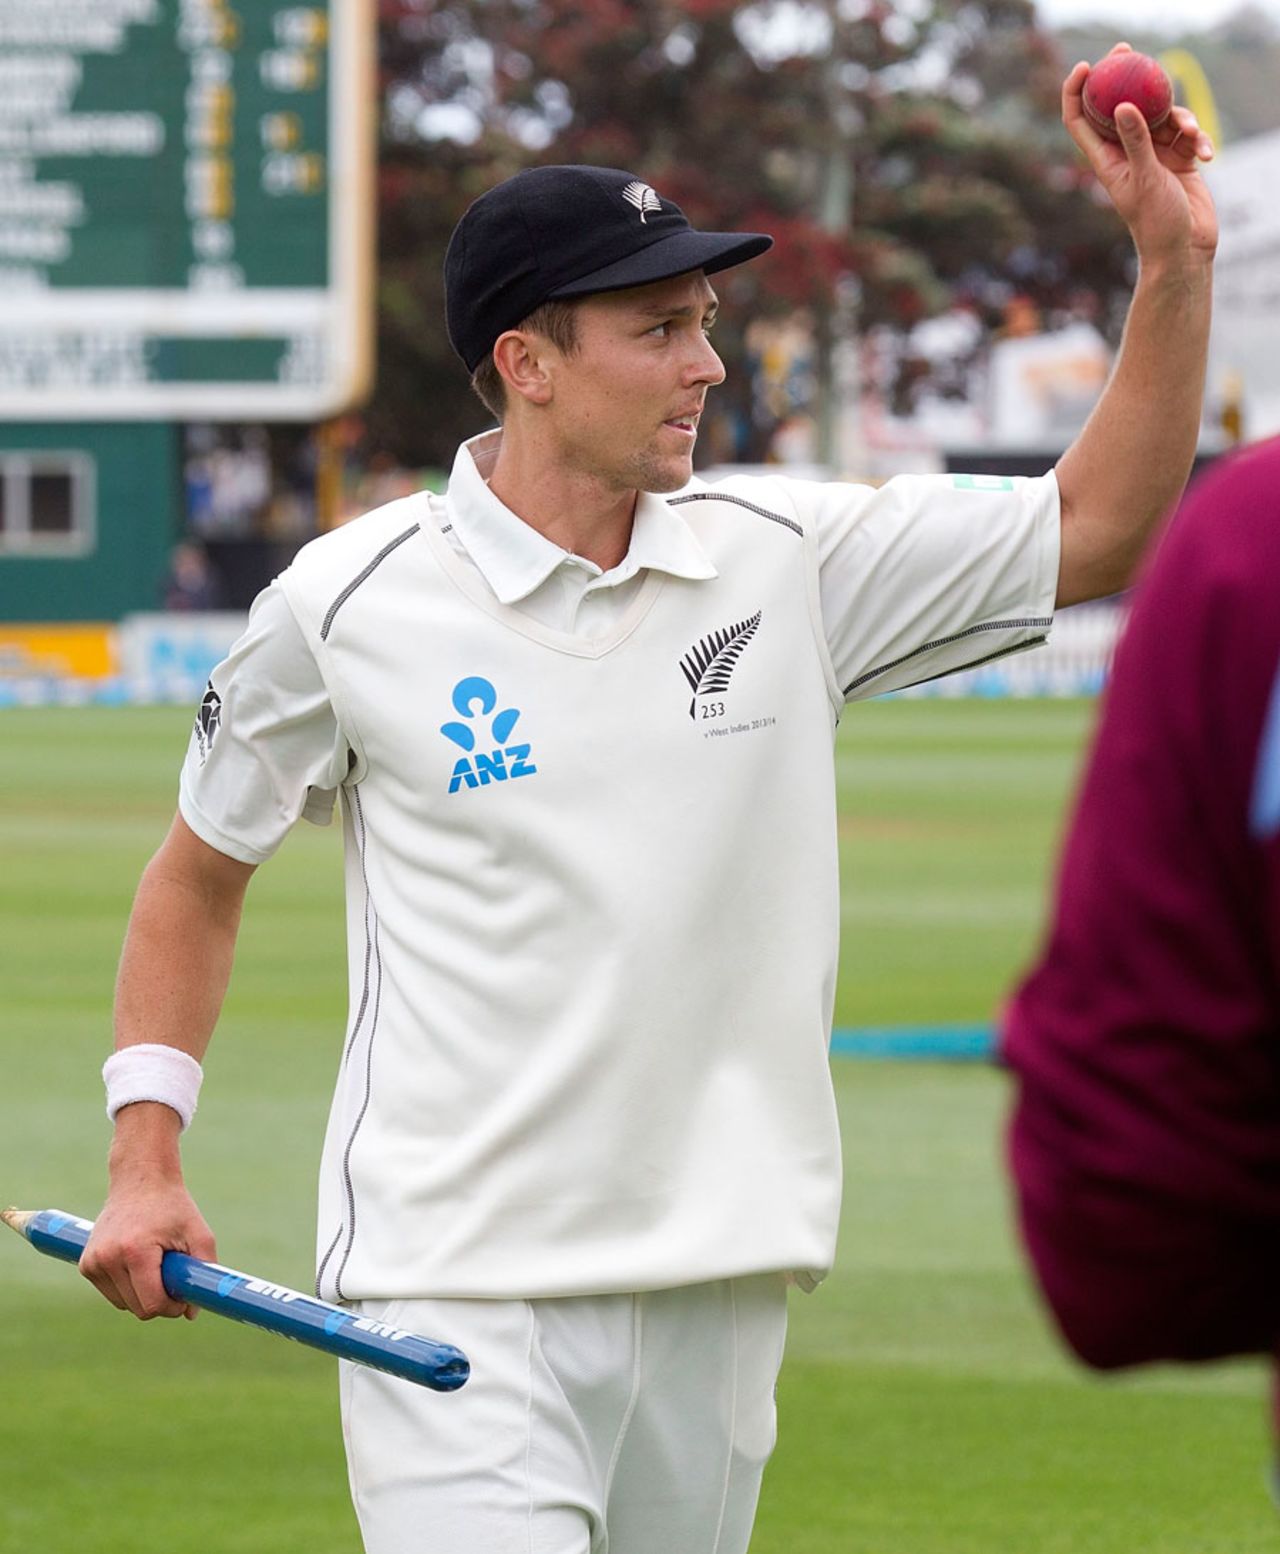 Trent Boult acknowledges the crowd after claiming 10 wickets in the match, New Zealand v West Indies, 2nd Test, Wellington, 3rd day, December 13, 2013